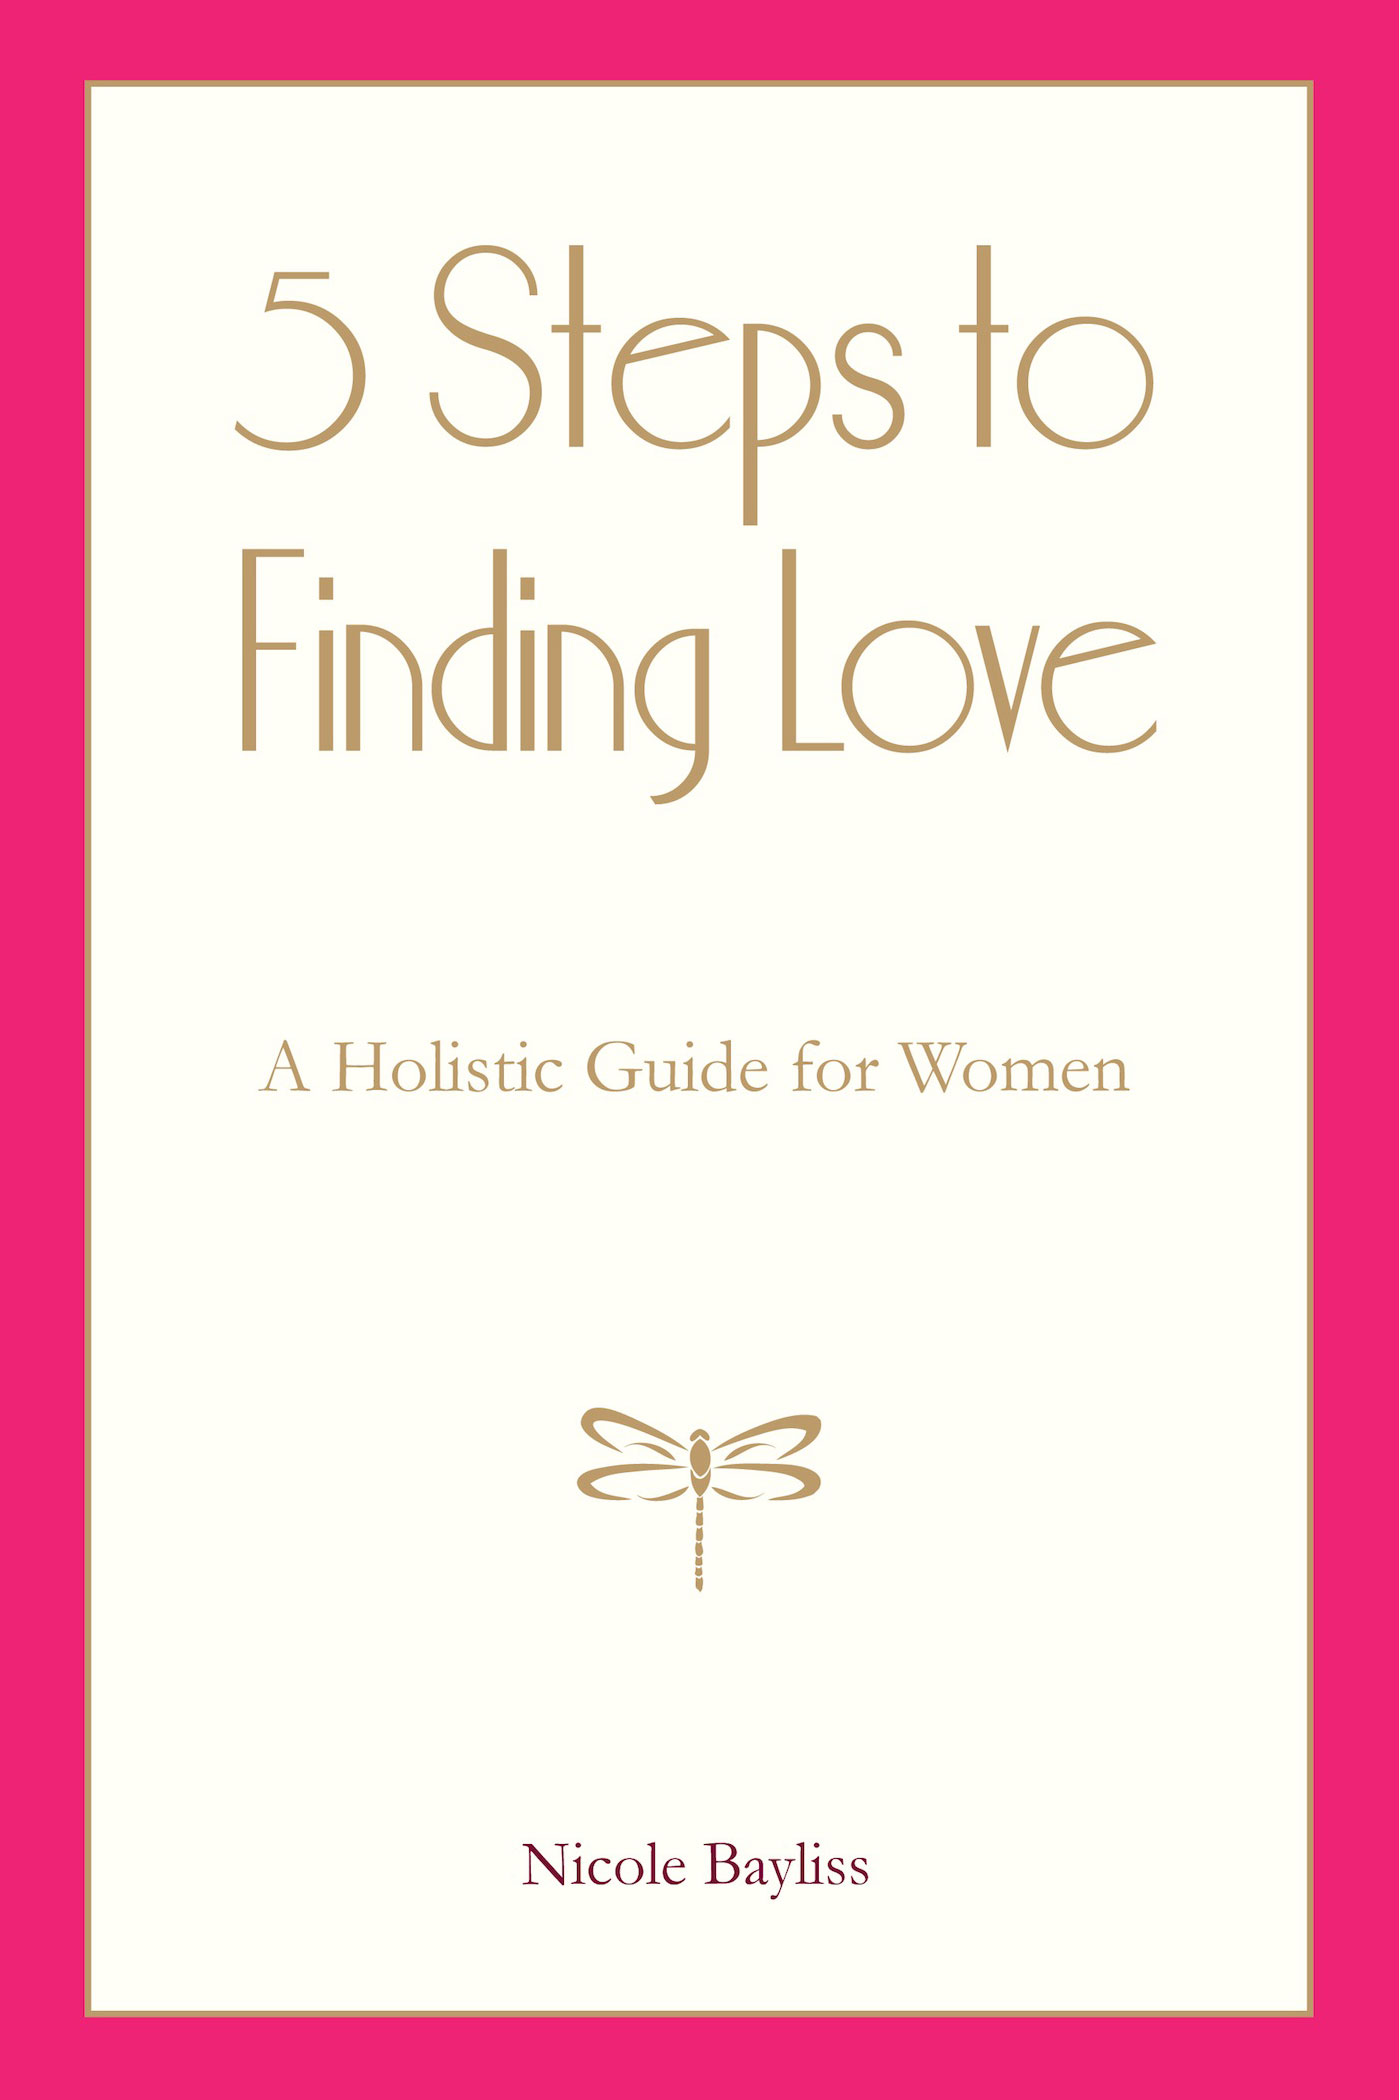 5 Steps to Finding Love - Nicole Bayliss